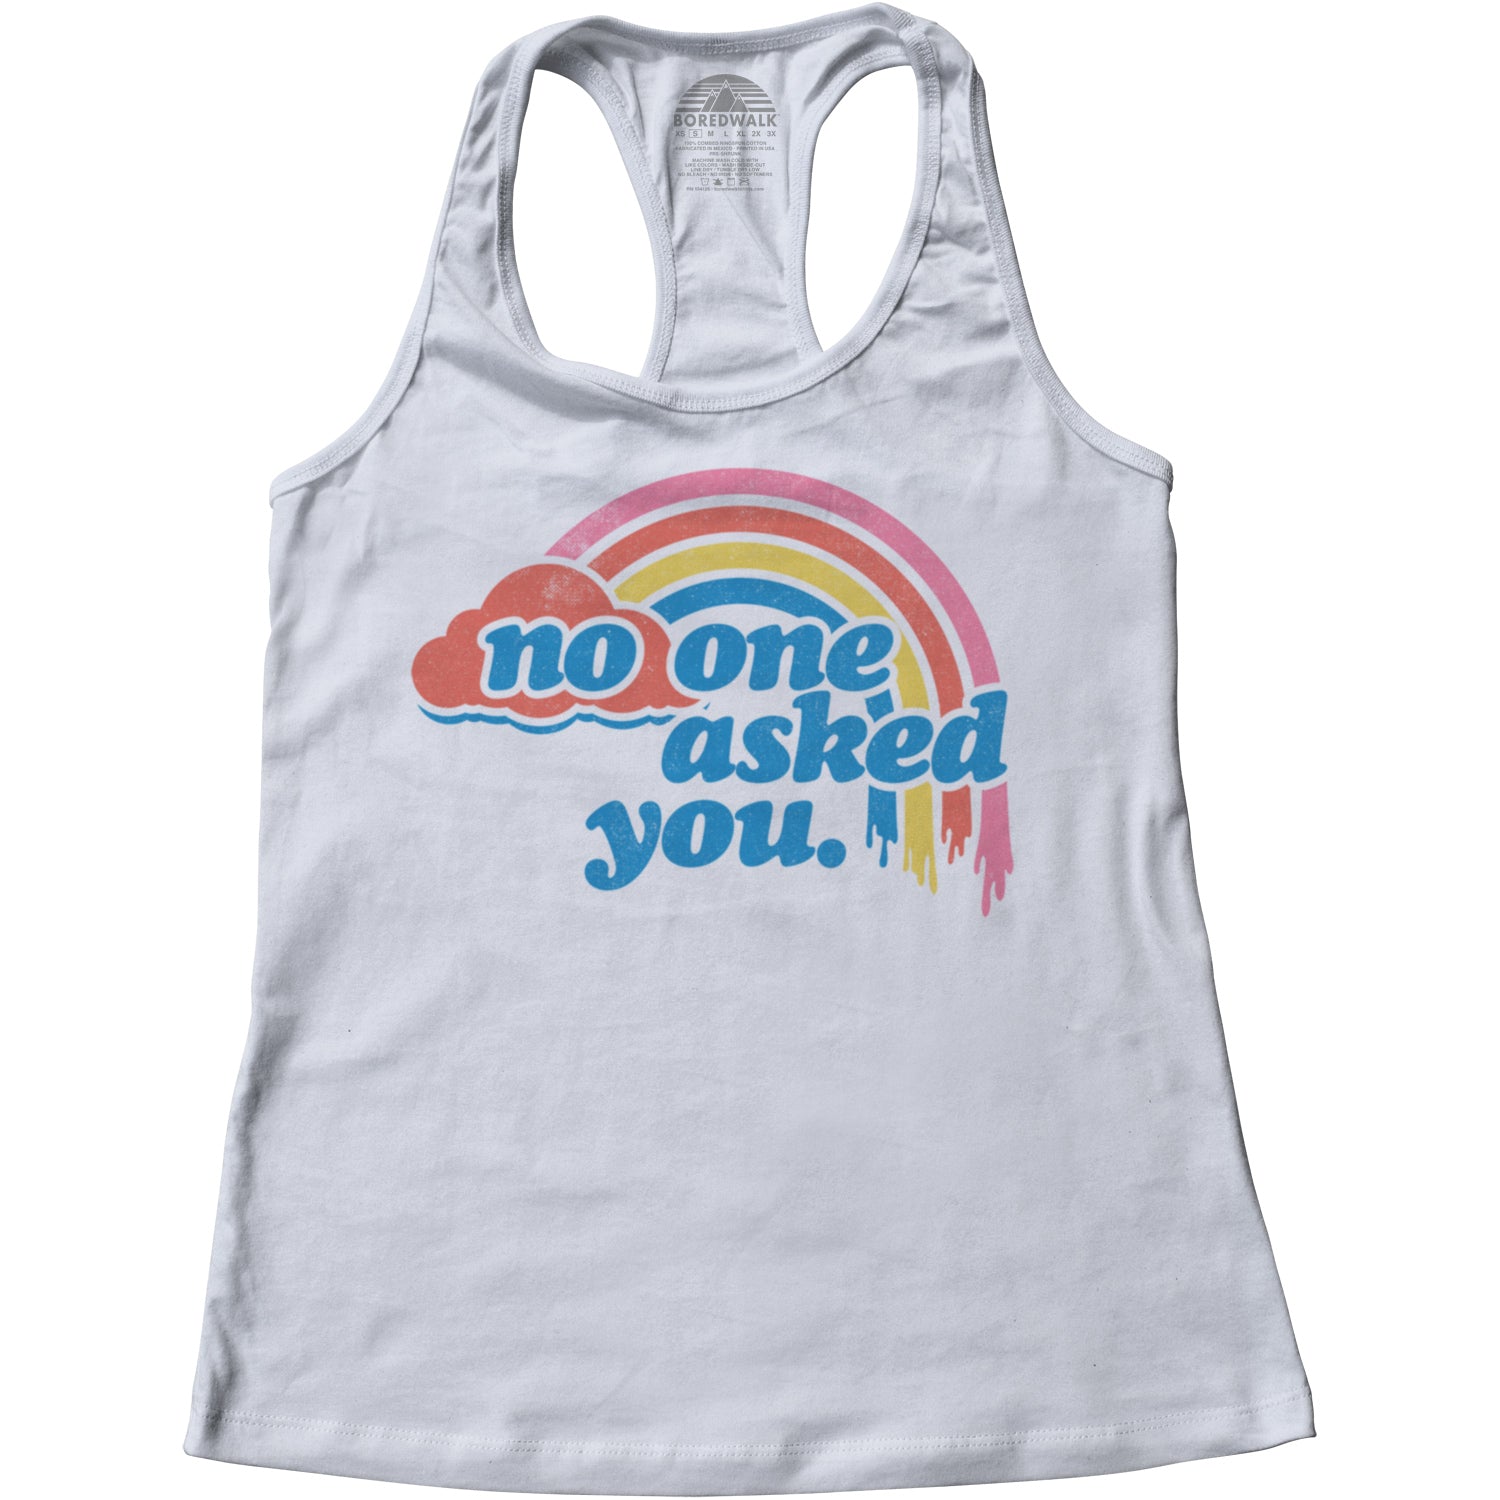 Women's No One Asked You Racerback Tank Top